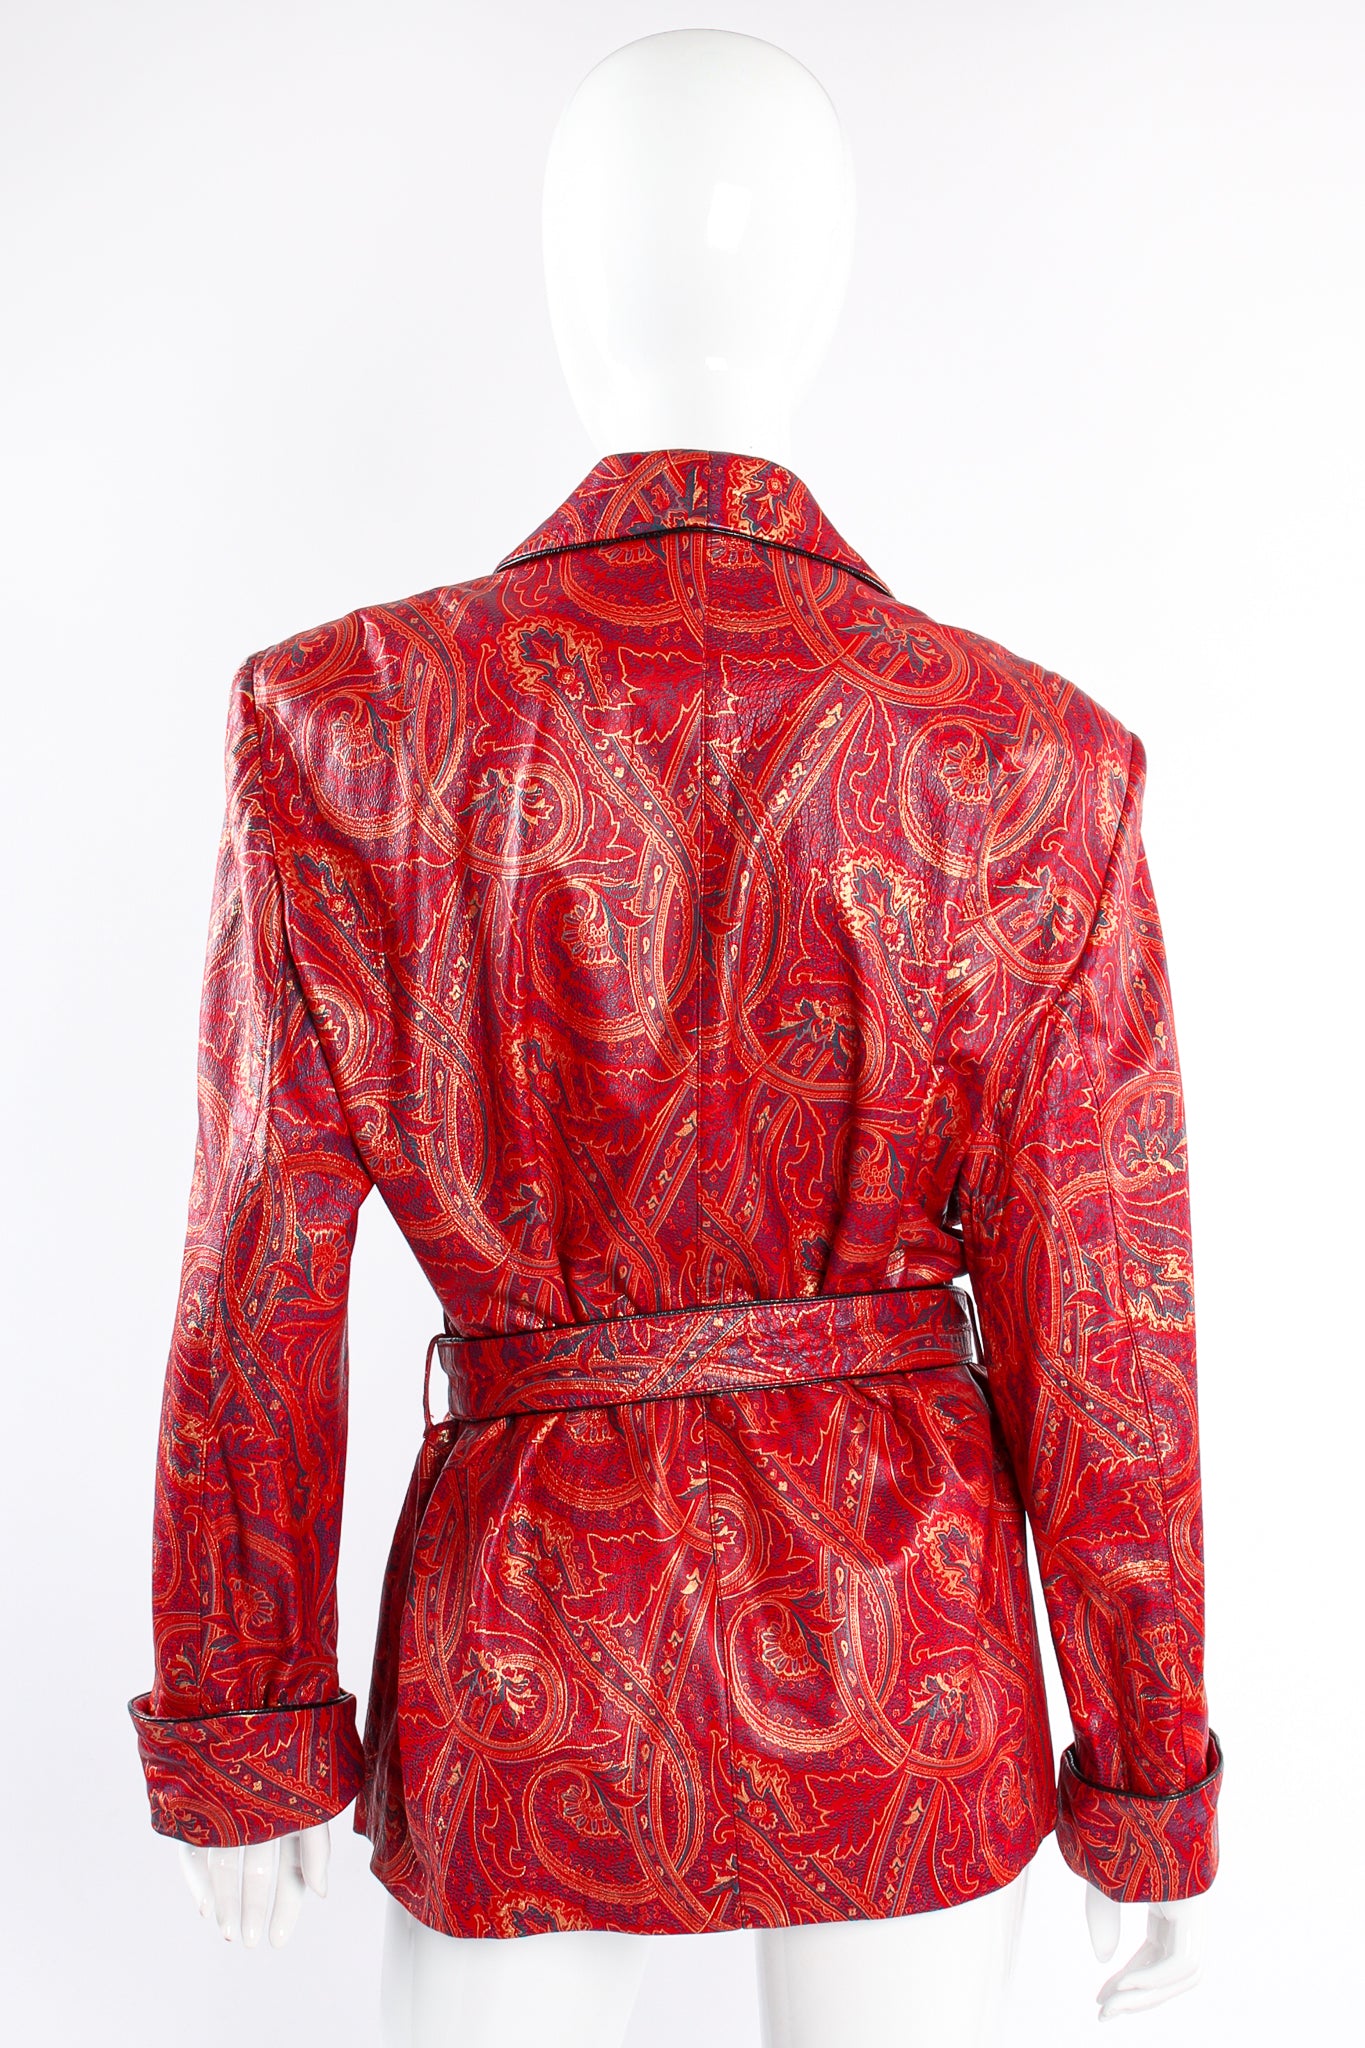 Vintage Carlos Falchi Paisley Leather Smoking Jacket on mannequin back at Recess Los Angeles